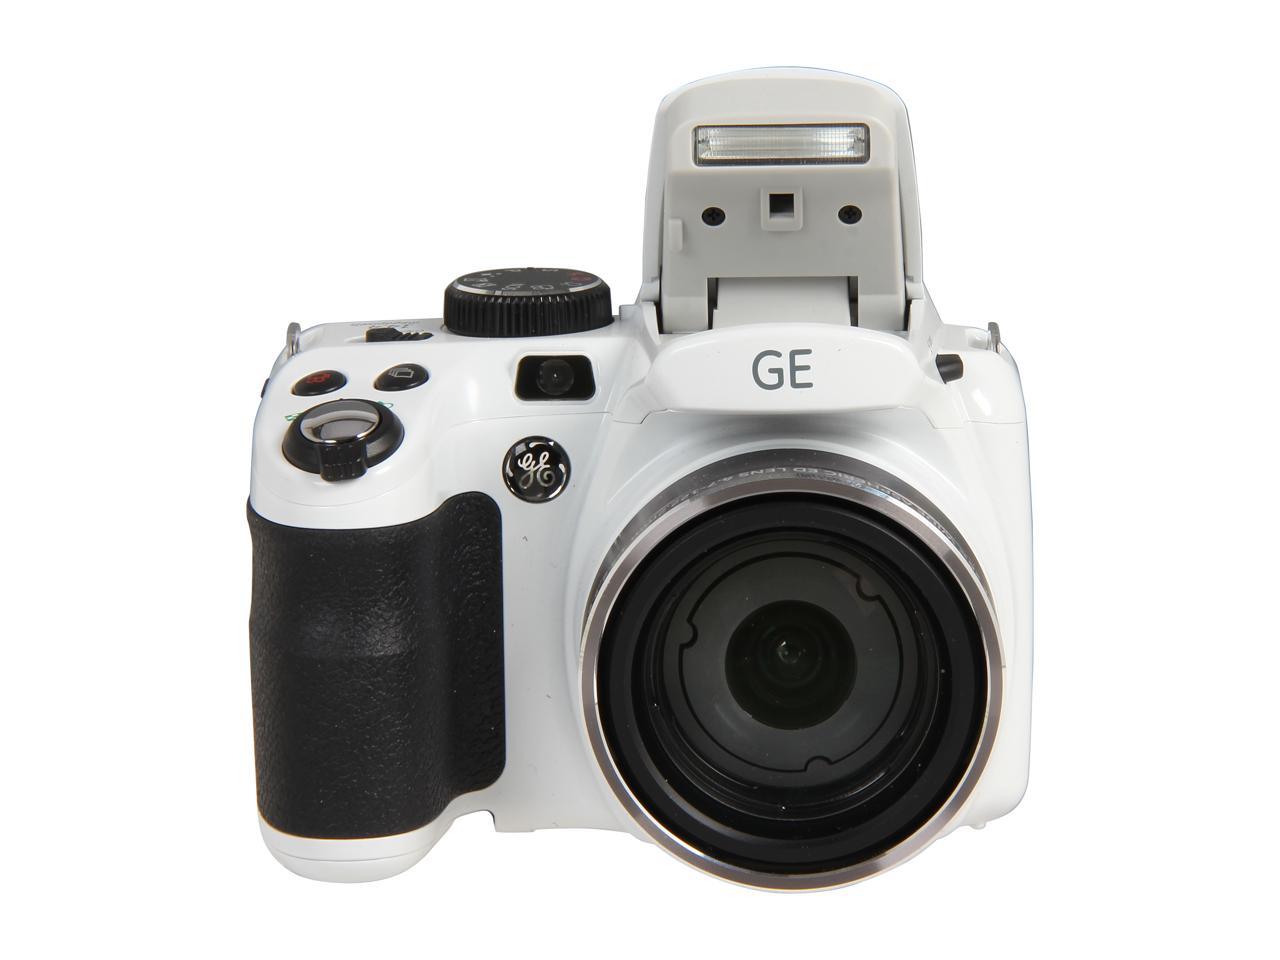 zoom in on detail on the ge x600 camera